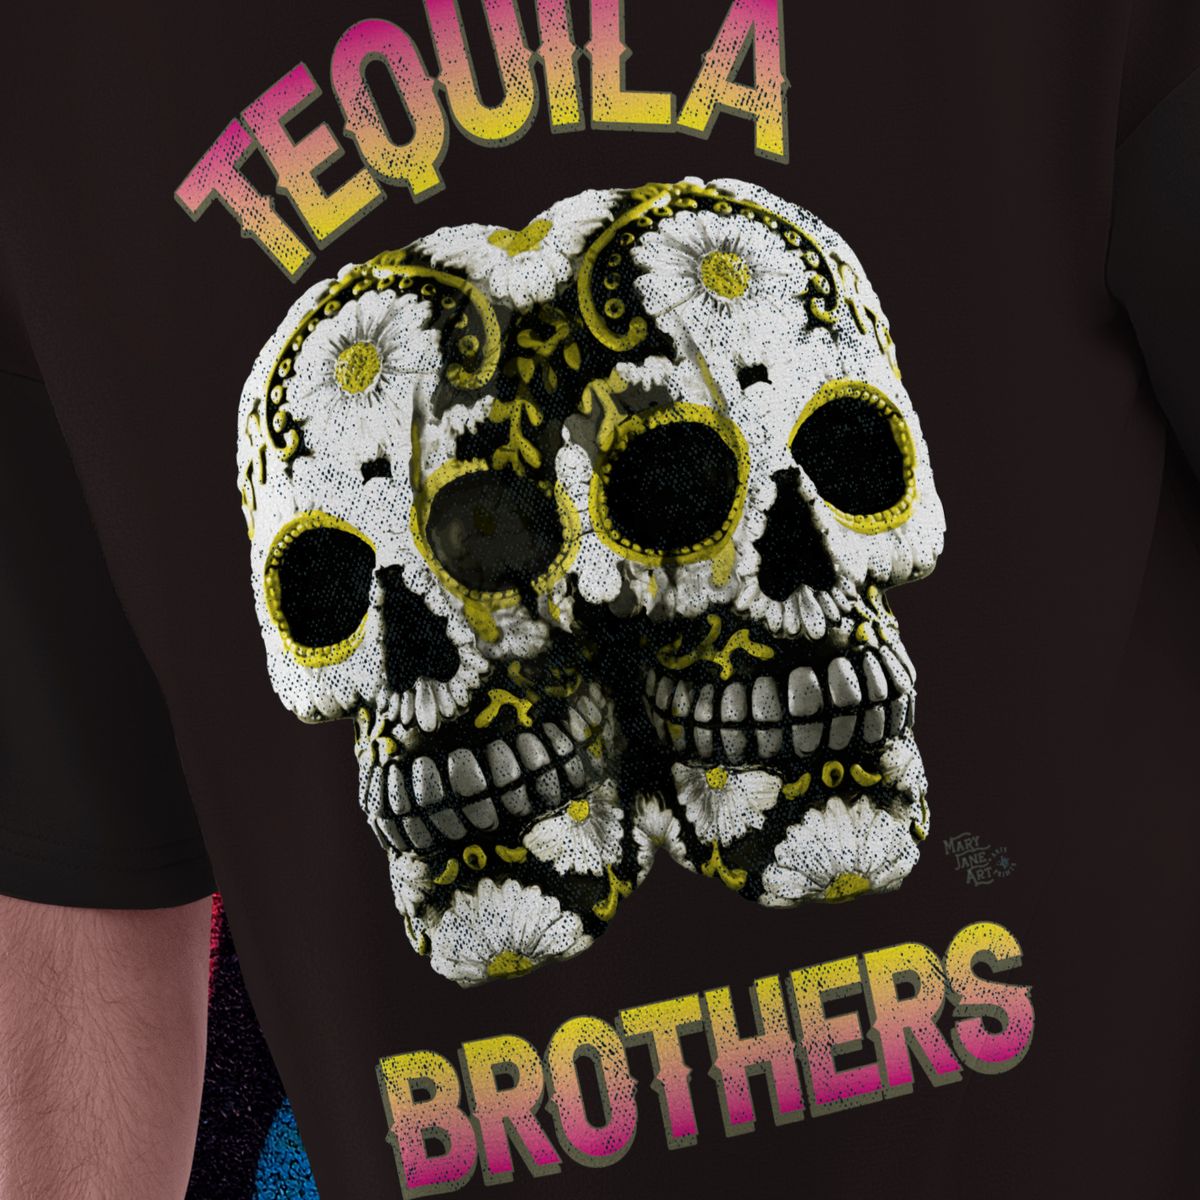 Nome do produto: Tshirt TEQUILA BROTHERS